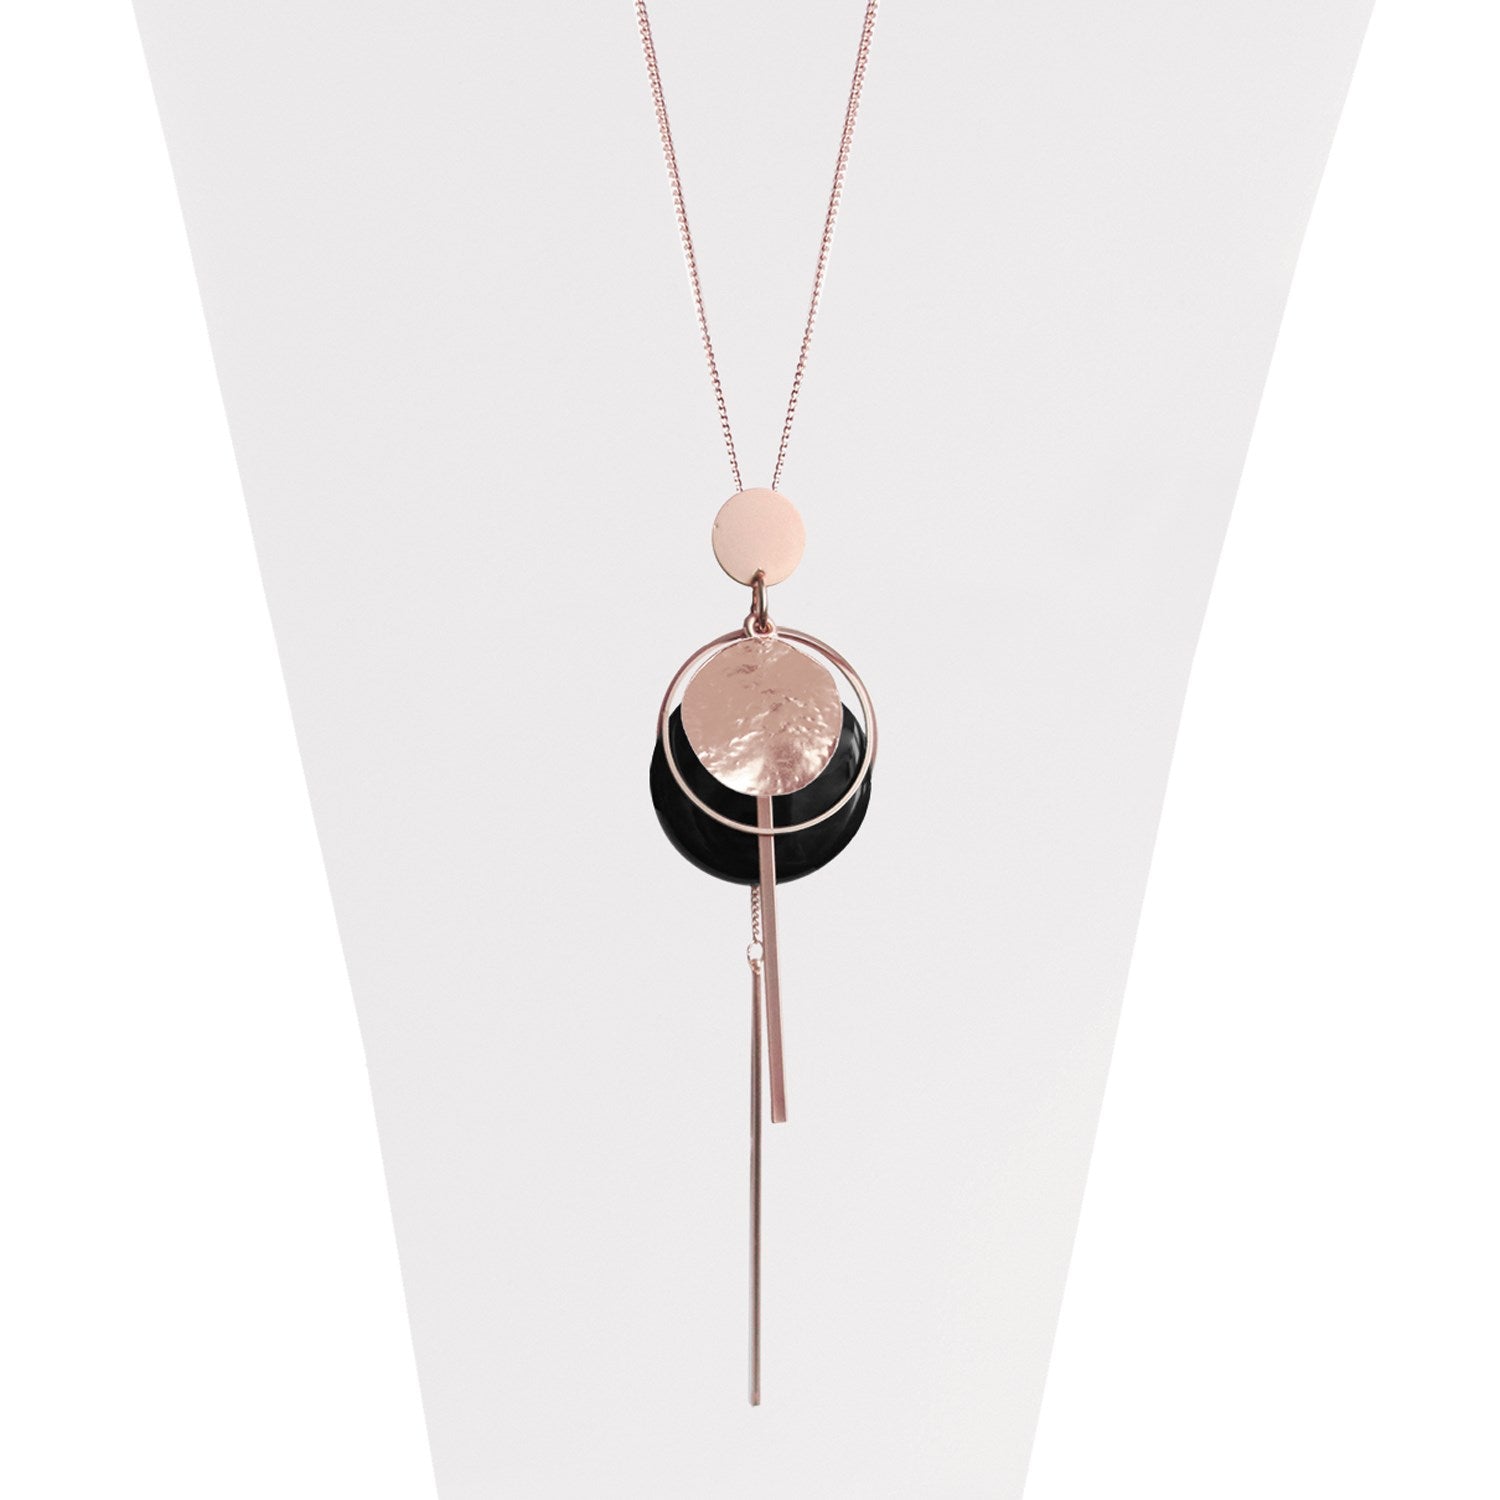 Rose gold adjustable necklace with multi charms in a matte textured shiny finish